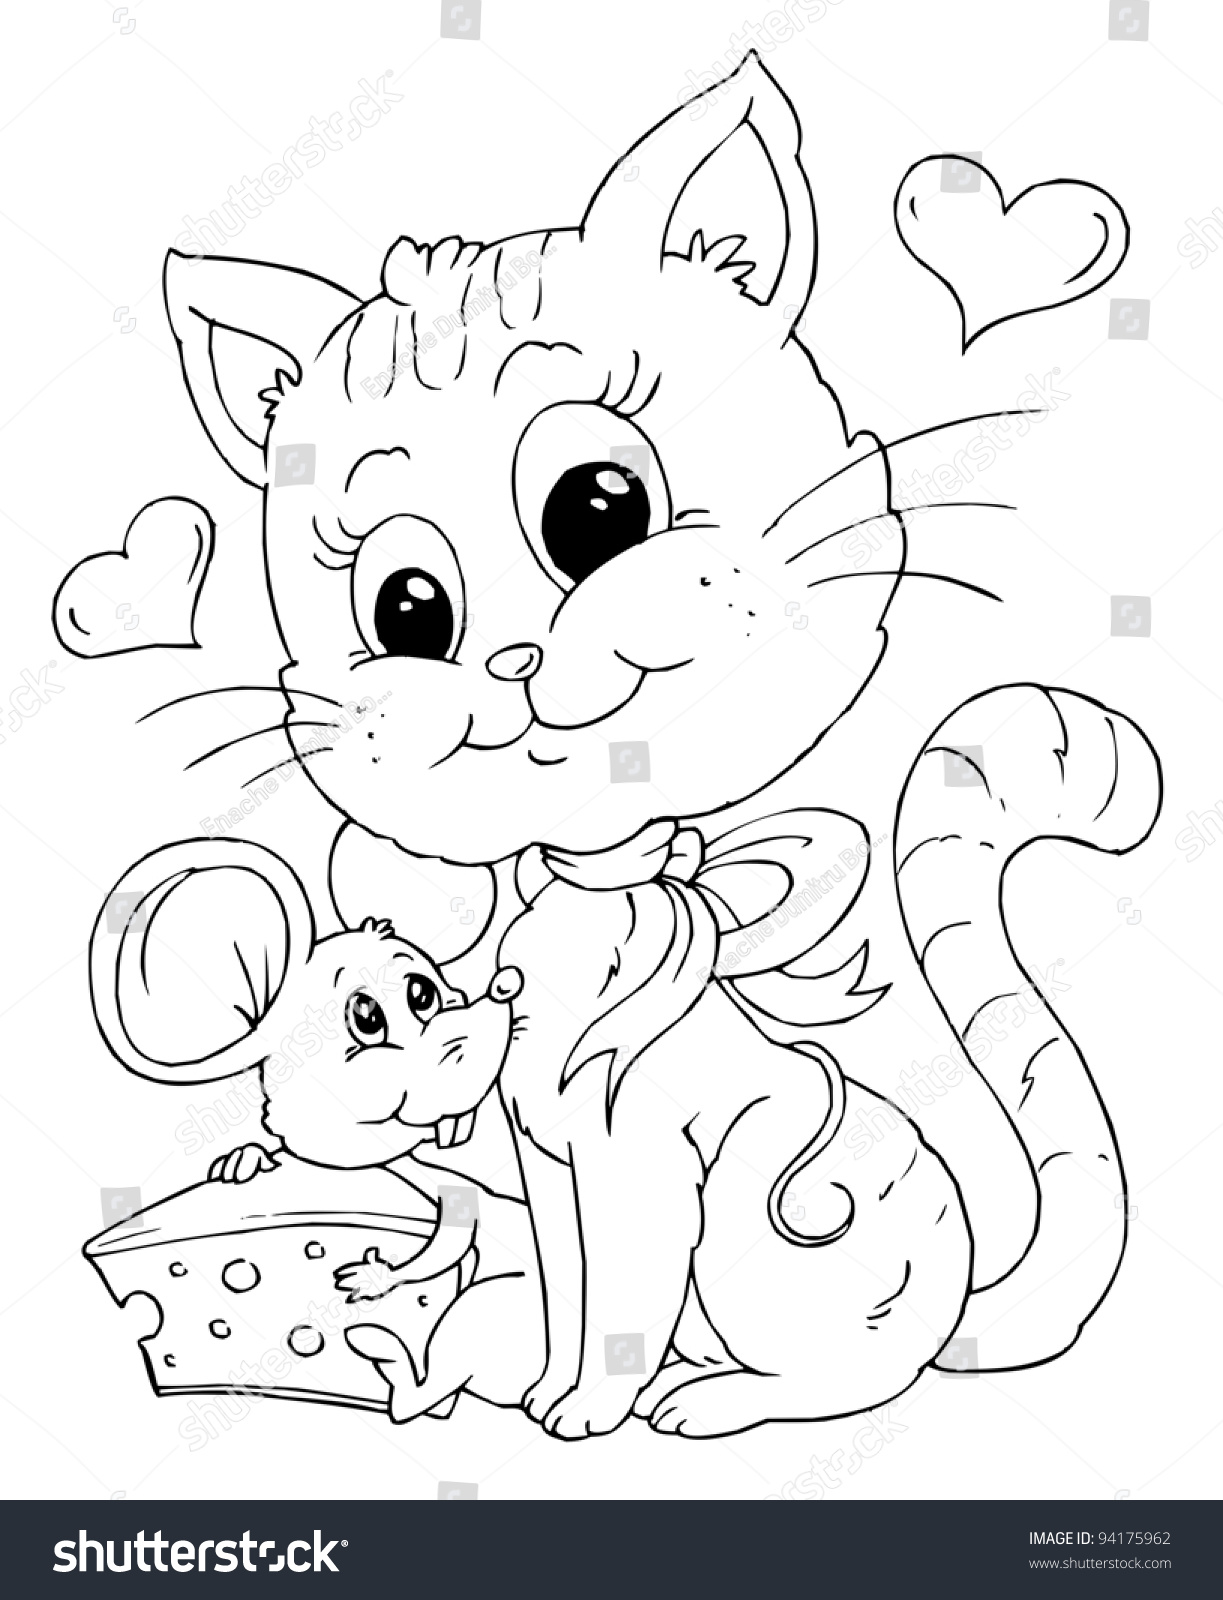 Friends Mouse Cat Illustration Coloring Page Stock Vector Royalty Free